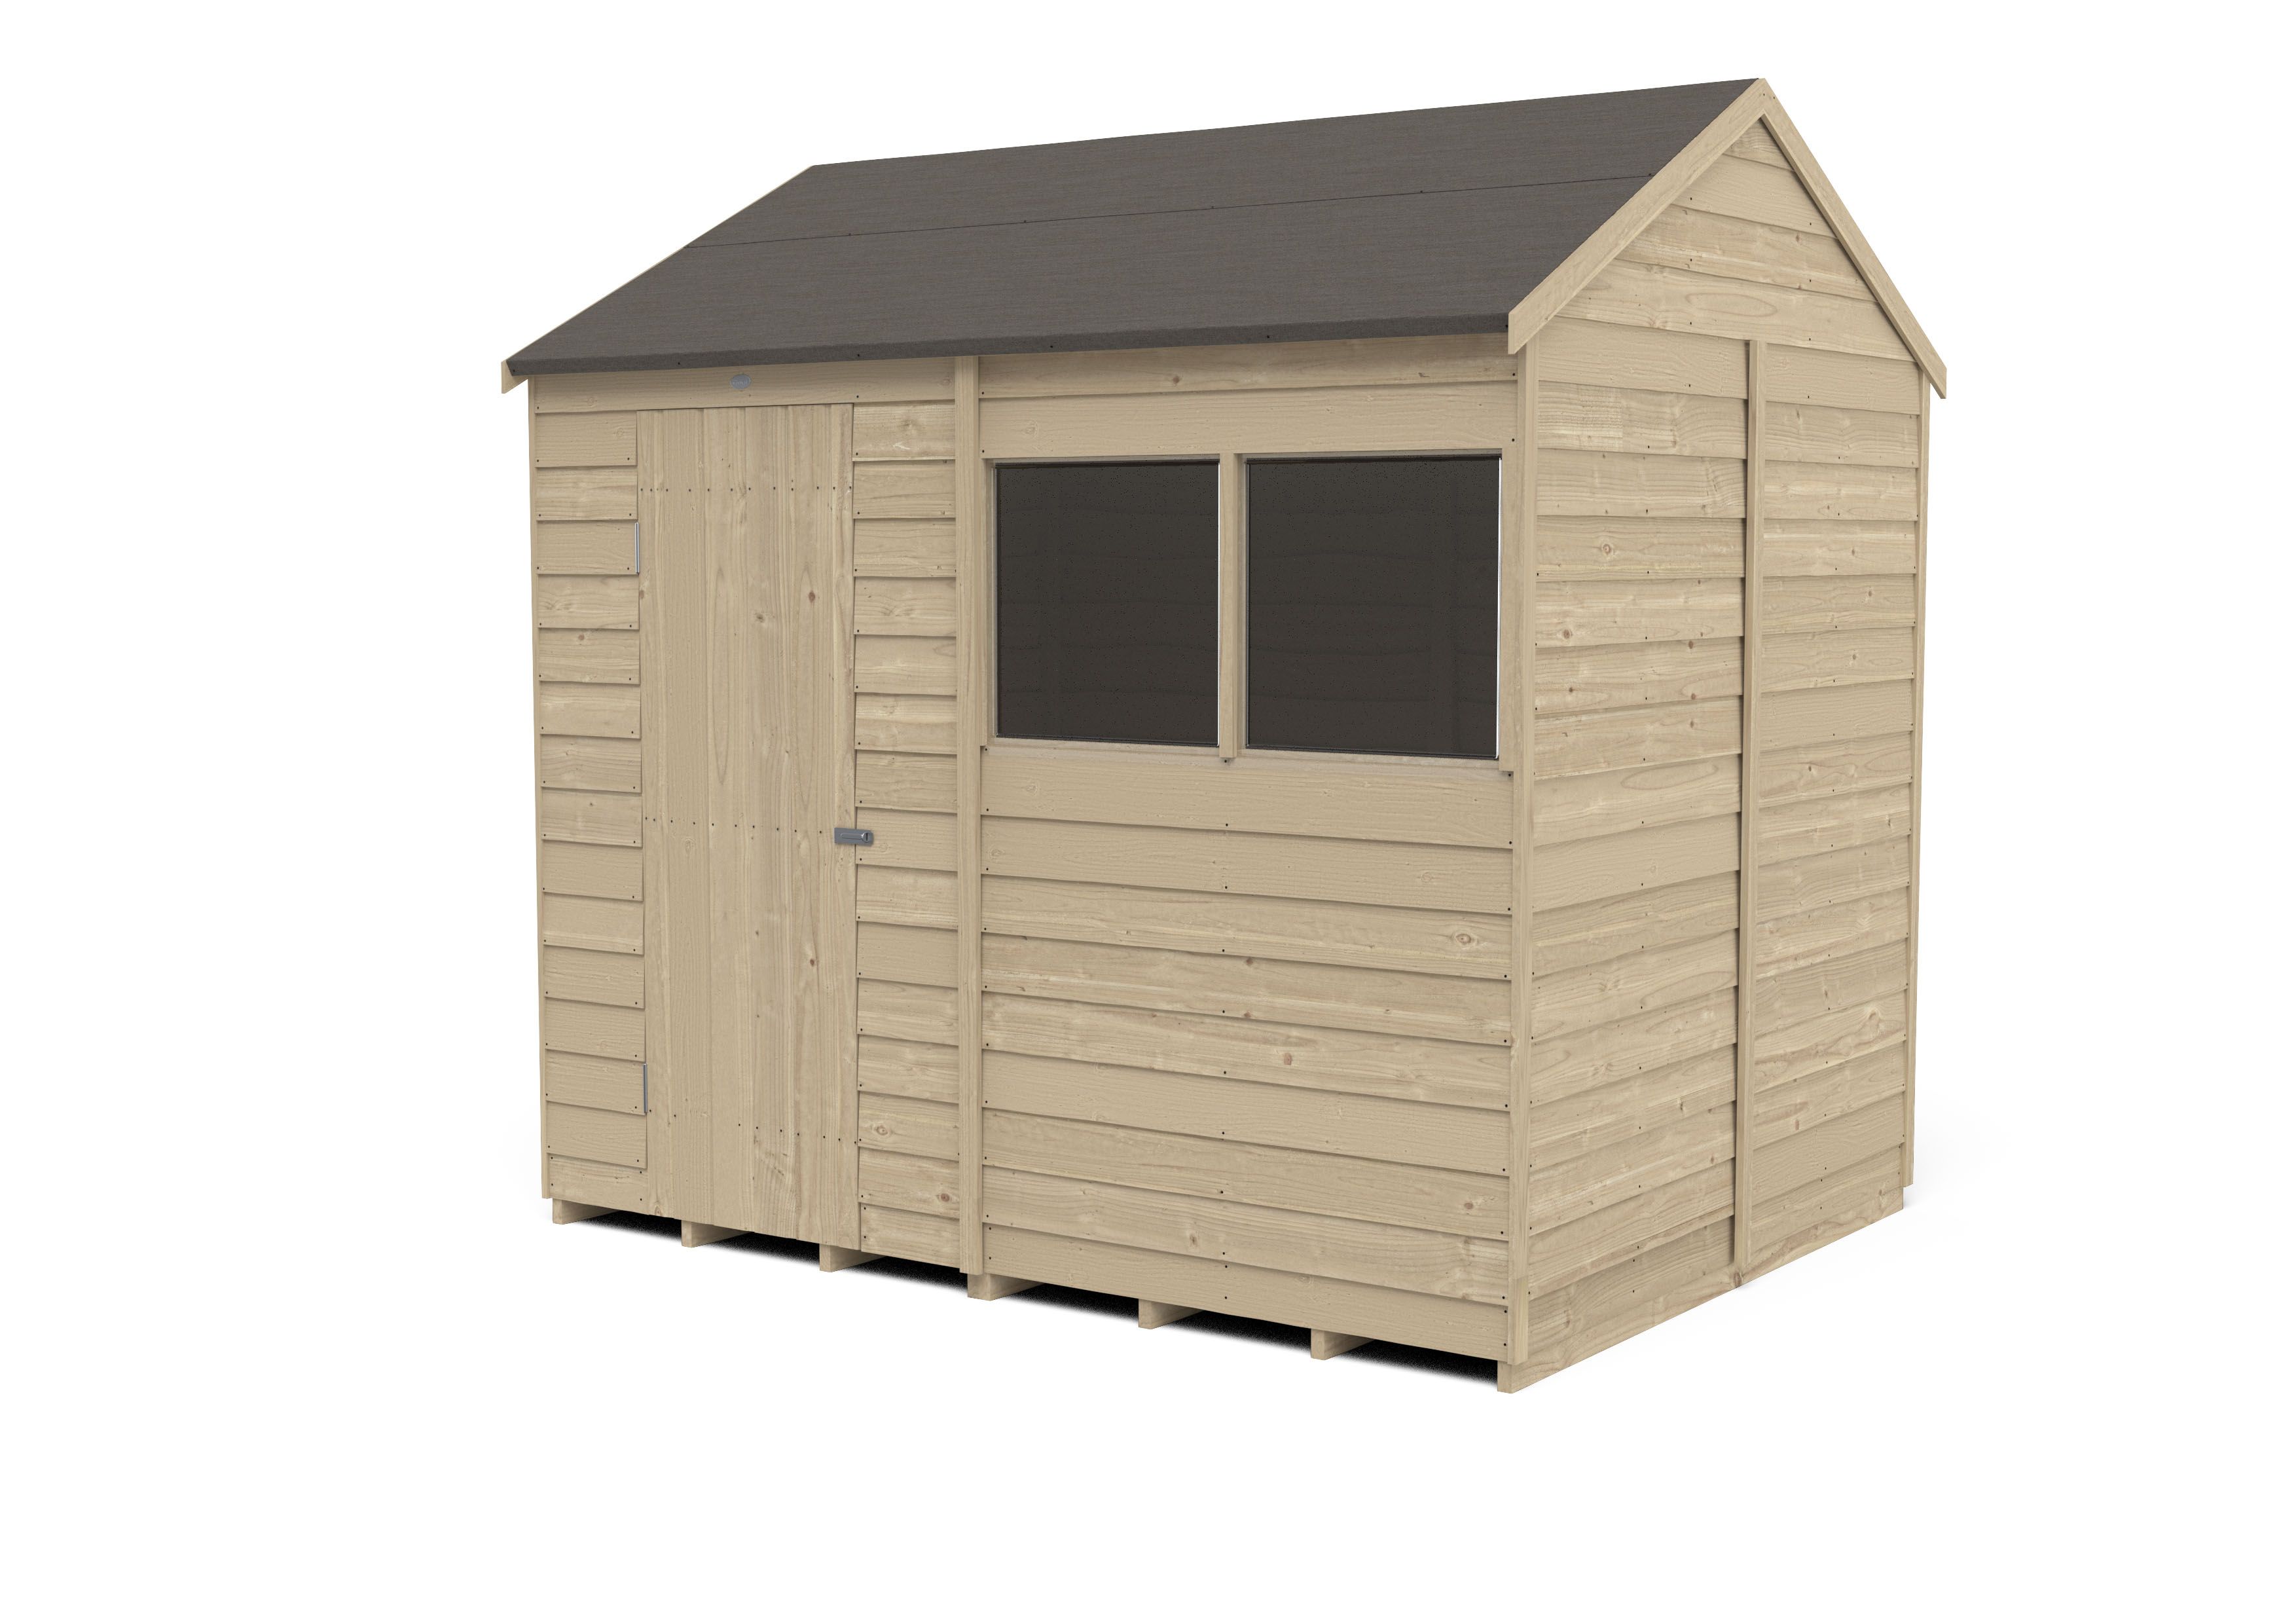 Forest Garden Overlap 8x6 ft Reverse apex Wooden Pressure treated Shed with floor & 2 windows